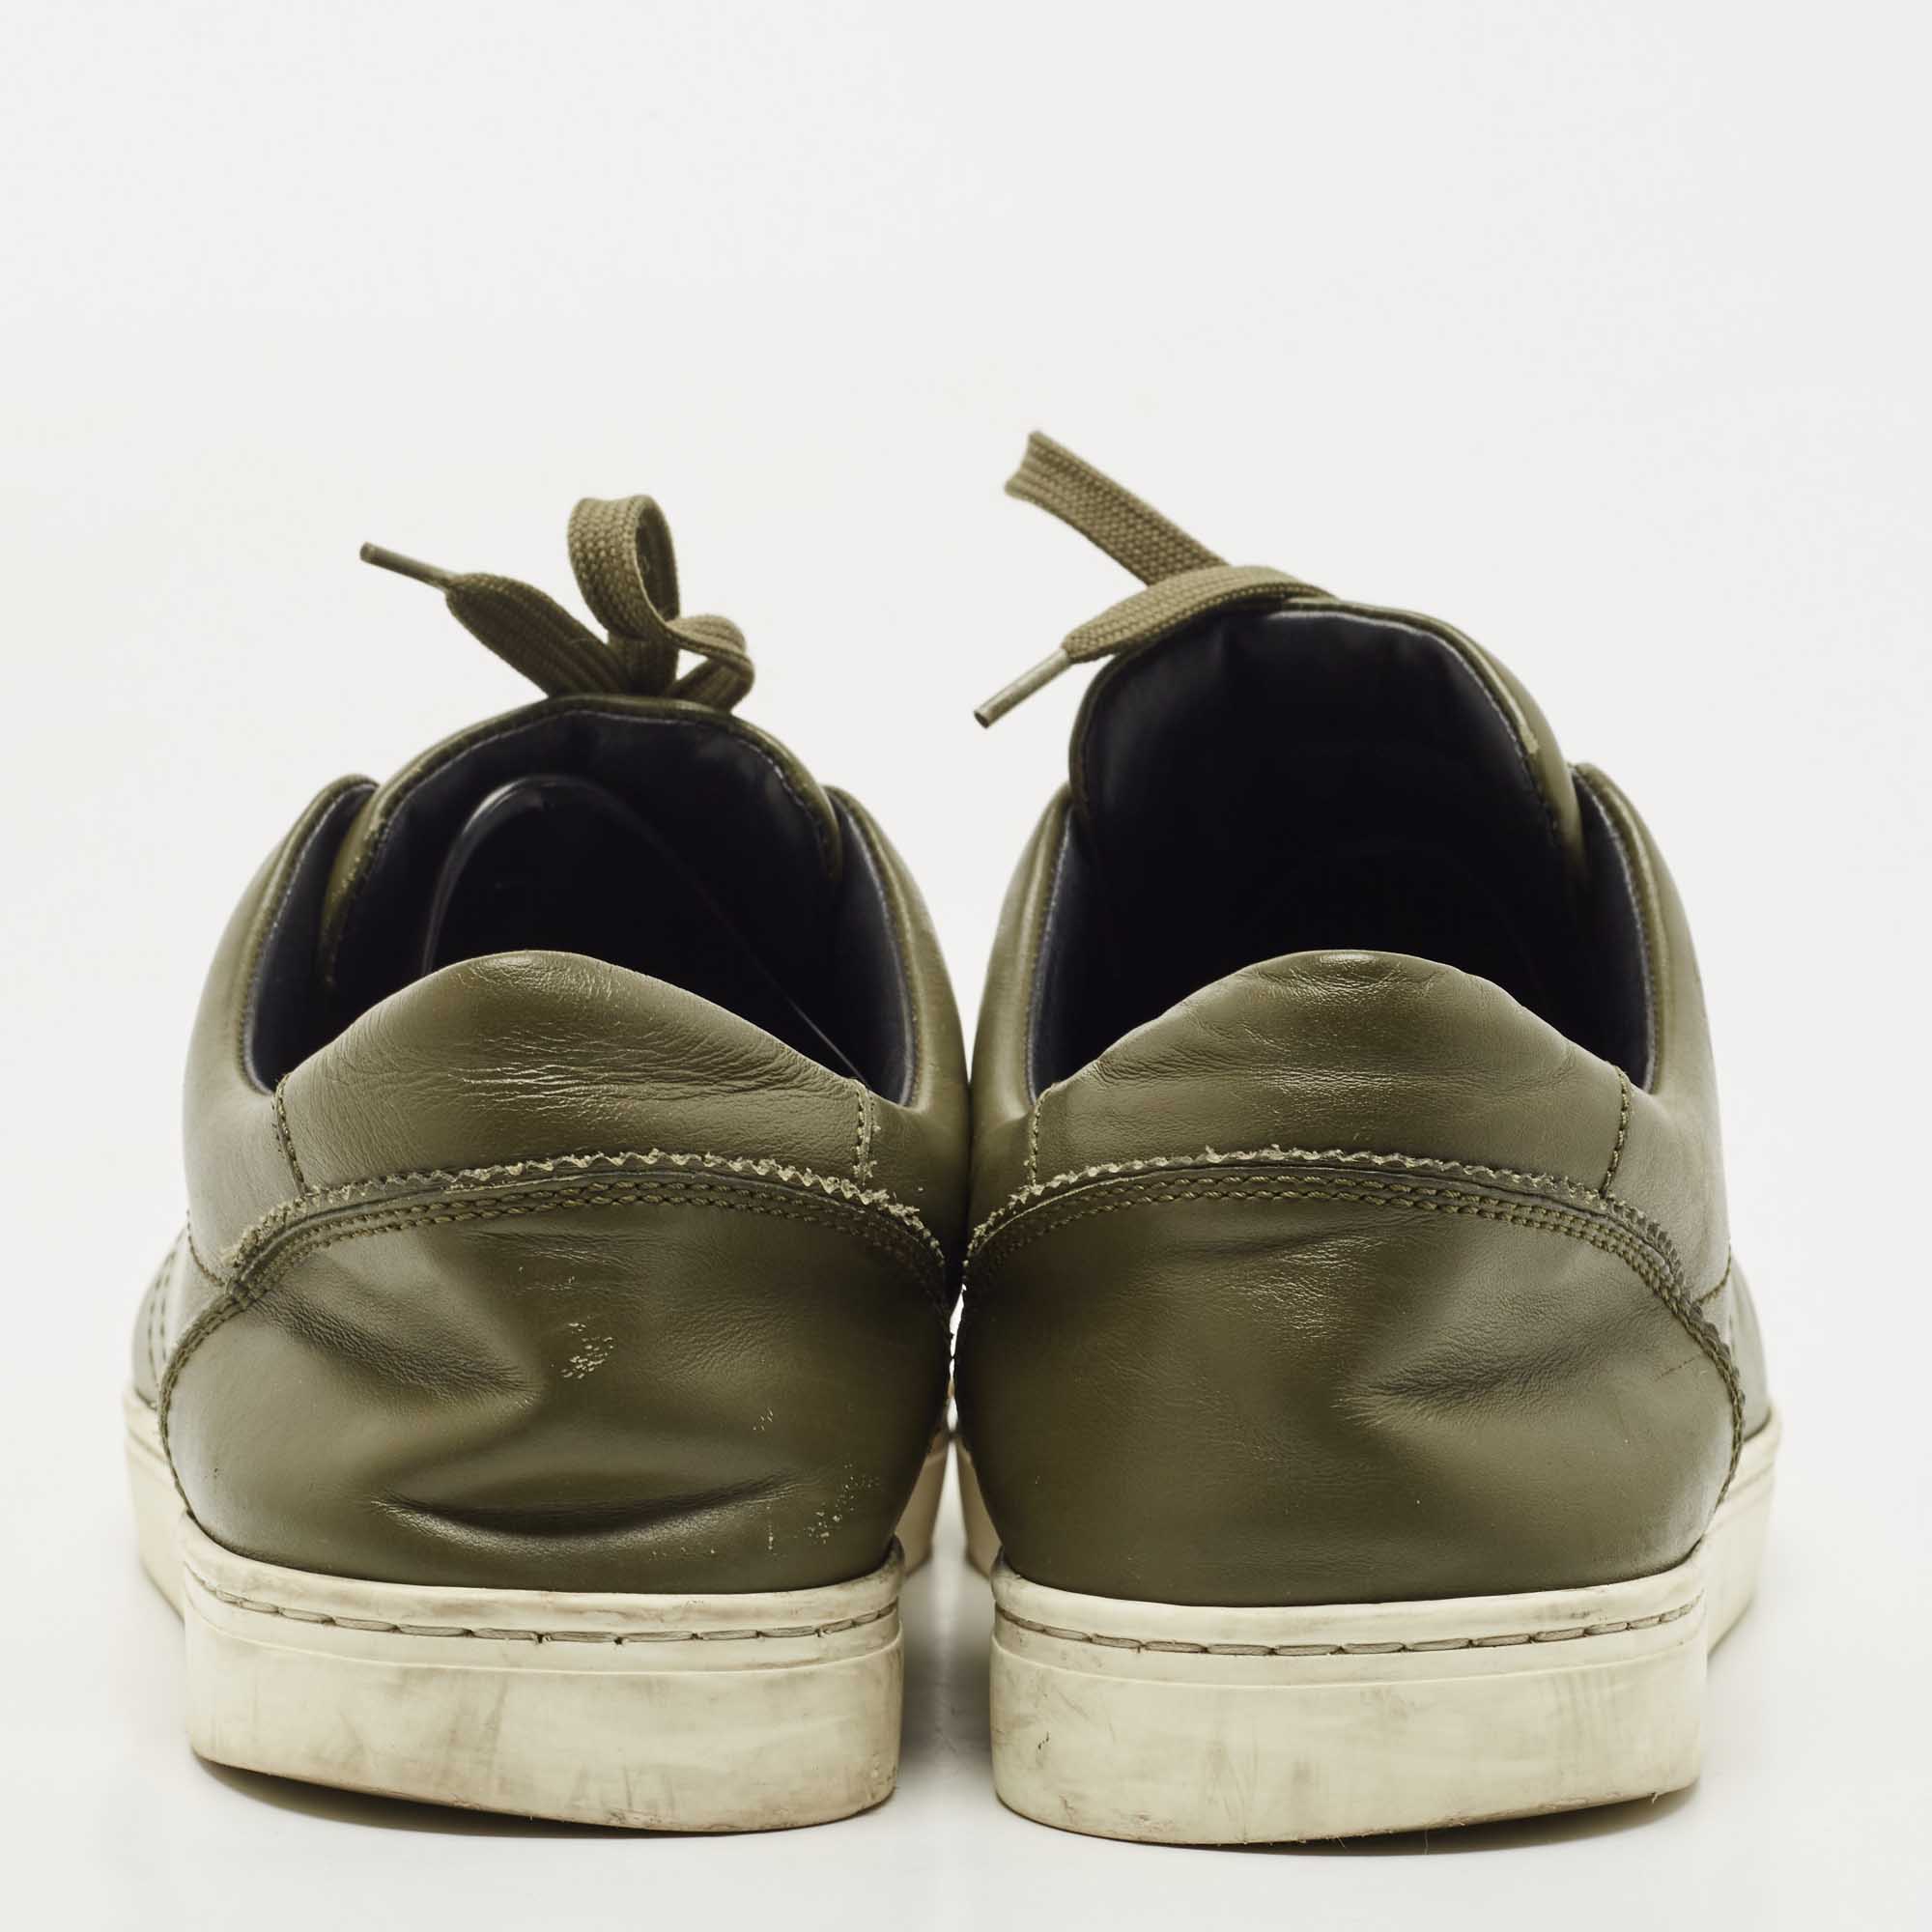 Dolce & Gabbana Army Green Leather Low Top Sneakers Size 42